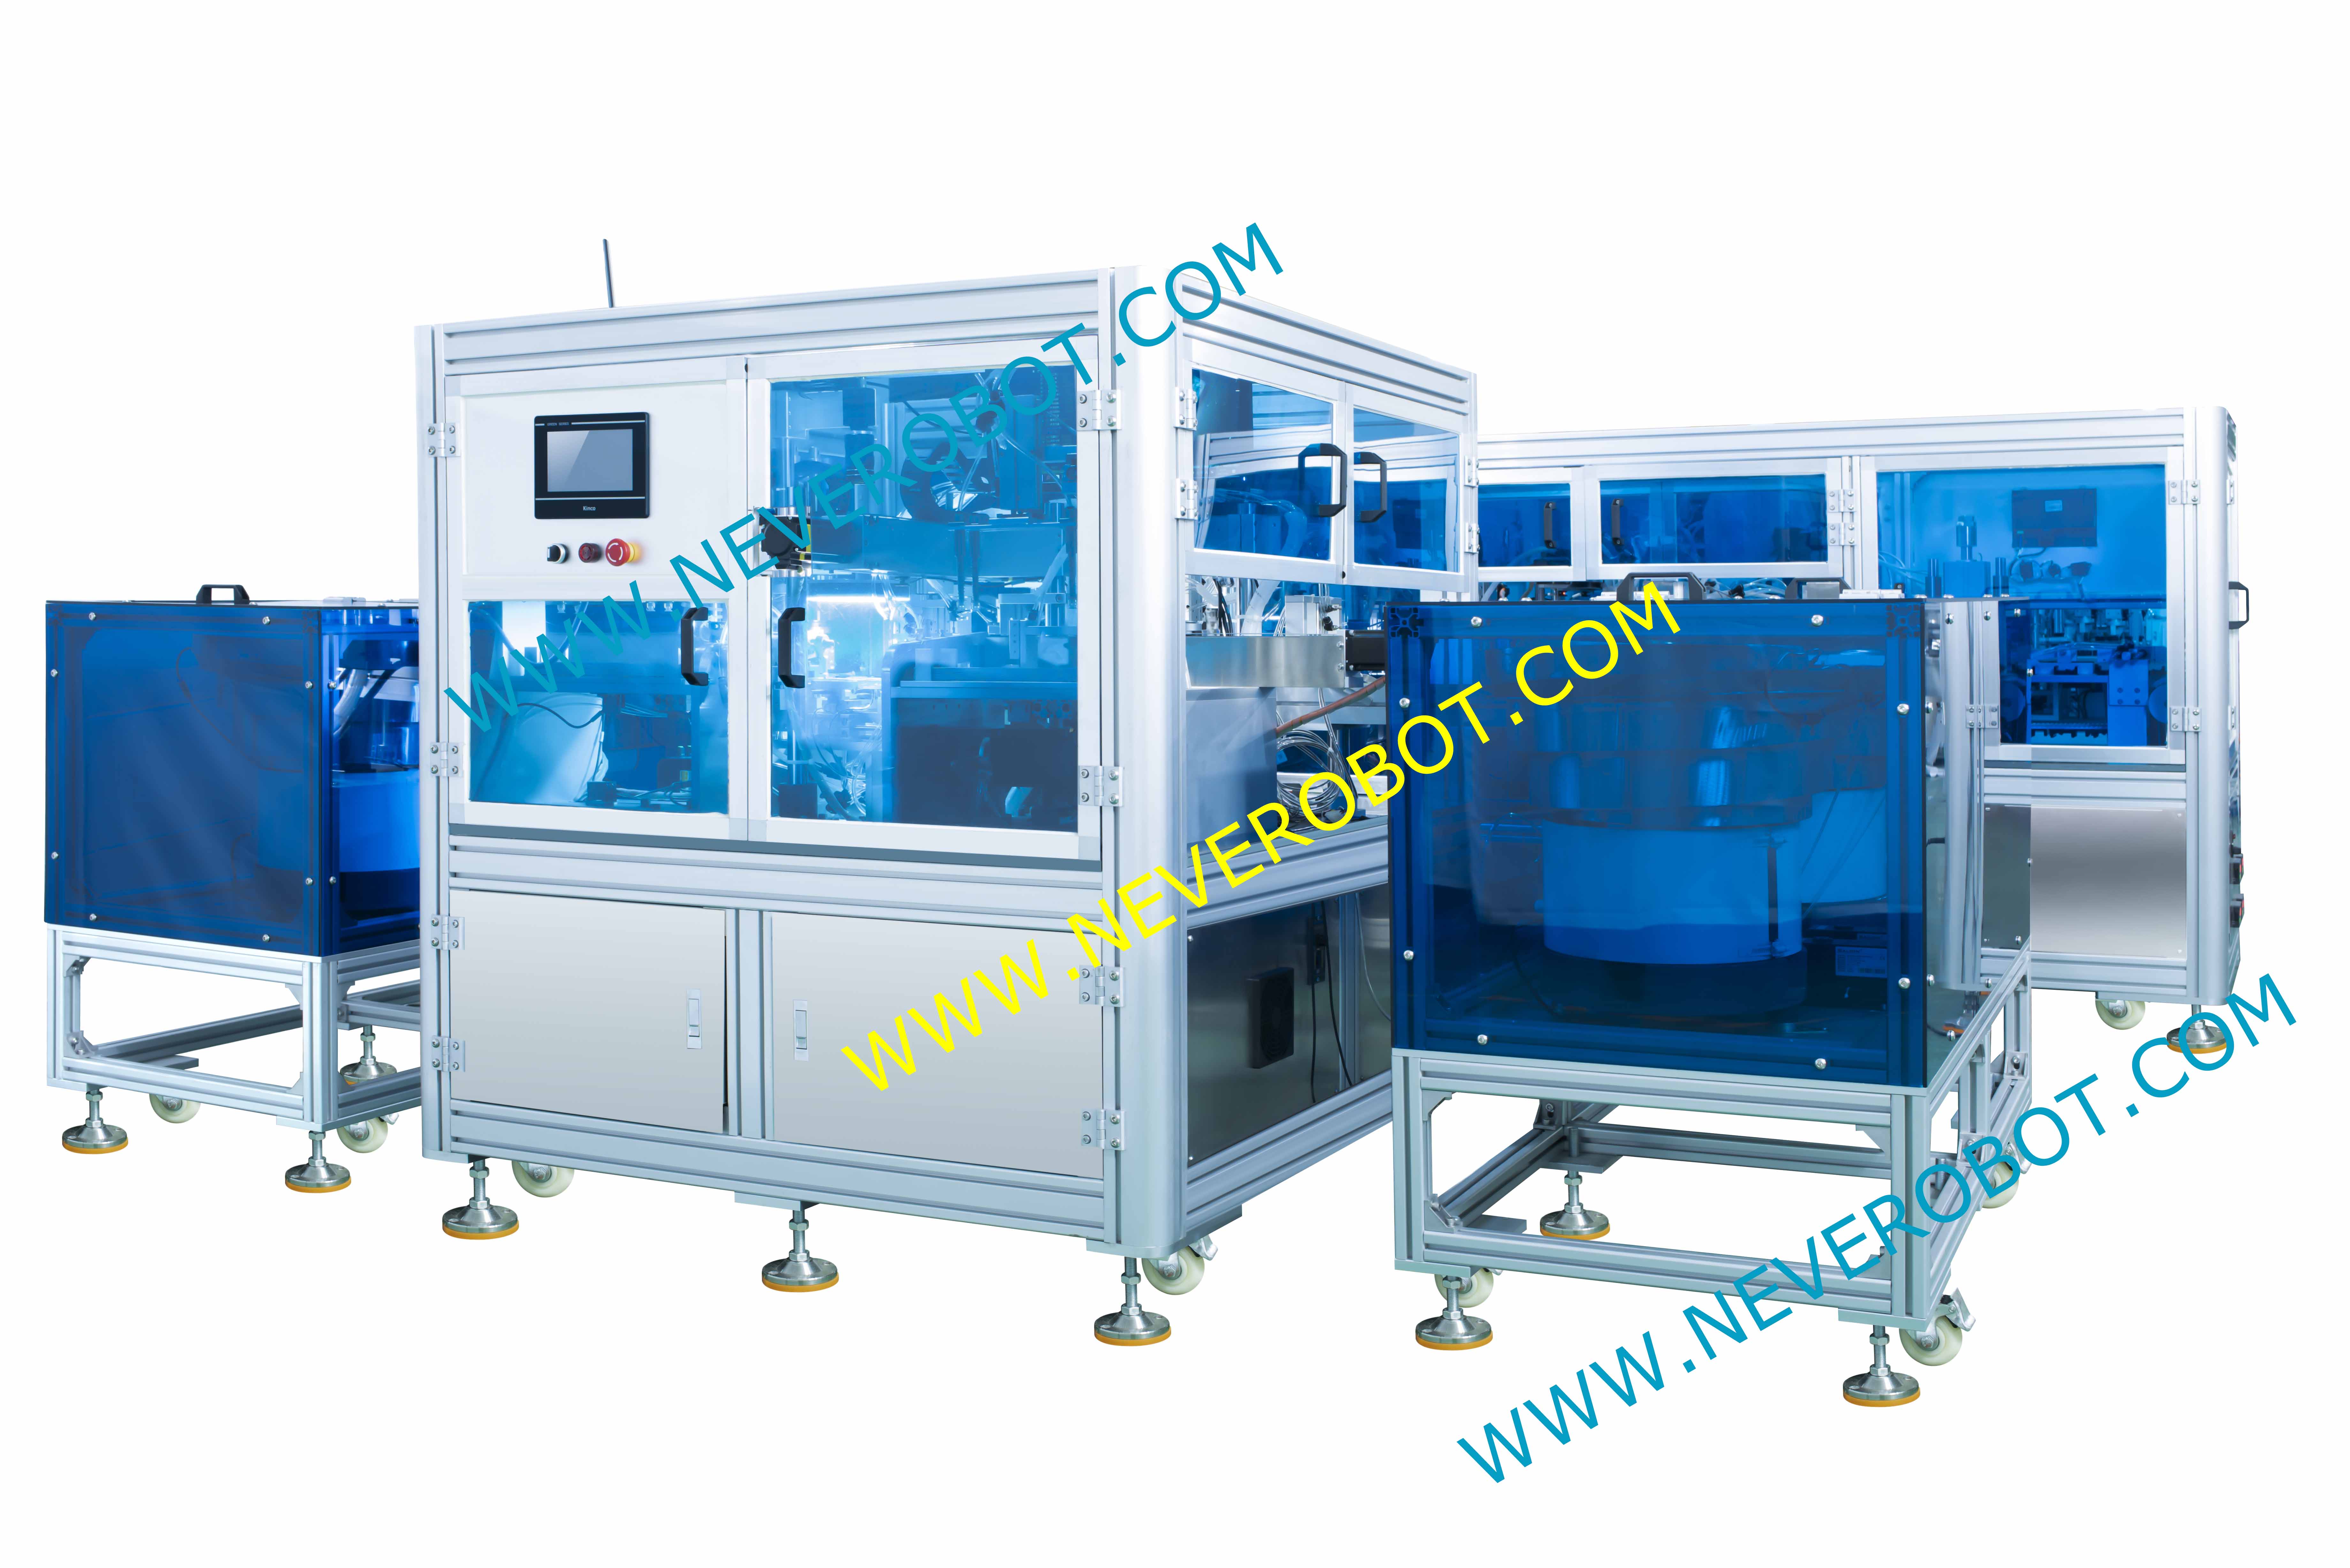 RAPID TEST KIT ASSEMBLY MACHINE, KIT PRODUCTION LINE Featured Image